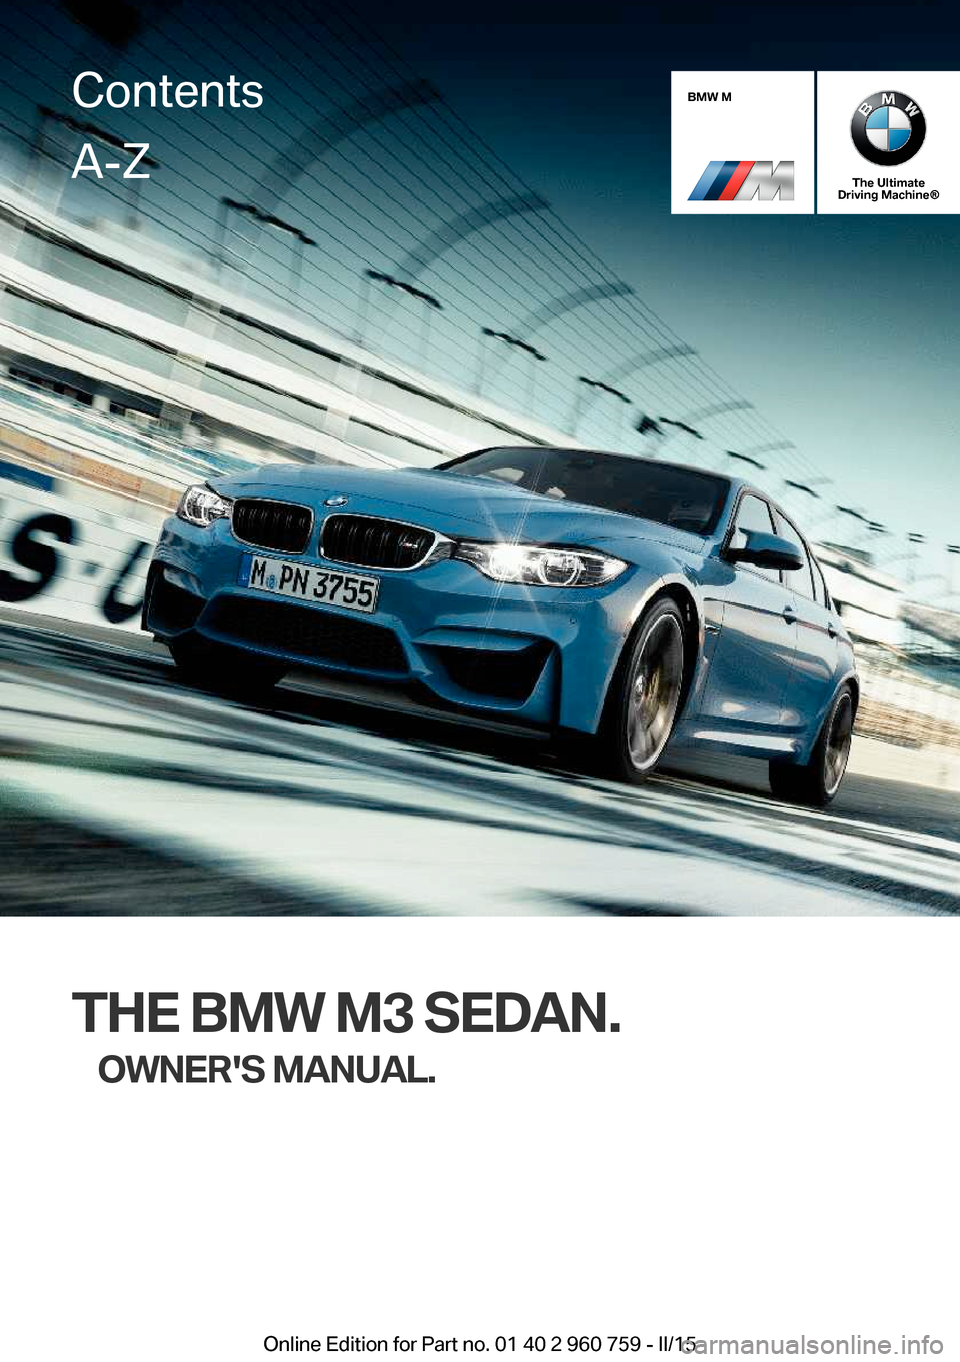 BMW M3 2015 F80 Owners Manual BMW M
The Ultimate
Driving Machine®
THE BMW M3 SEDAN.
OWNERS MANUAL.
ContentsA-Z
Online Edition for Part no. 01 40 2 960 759 - II/15   